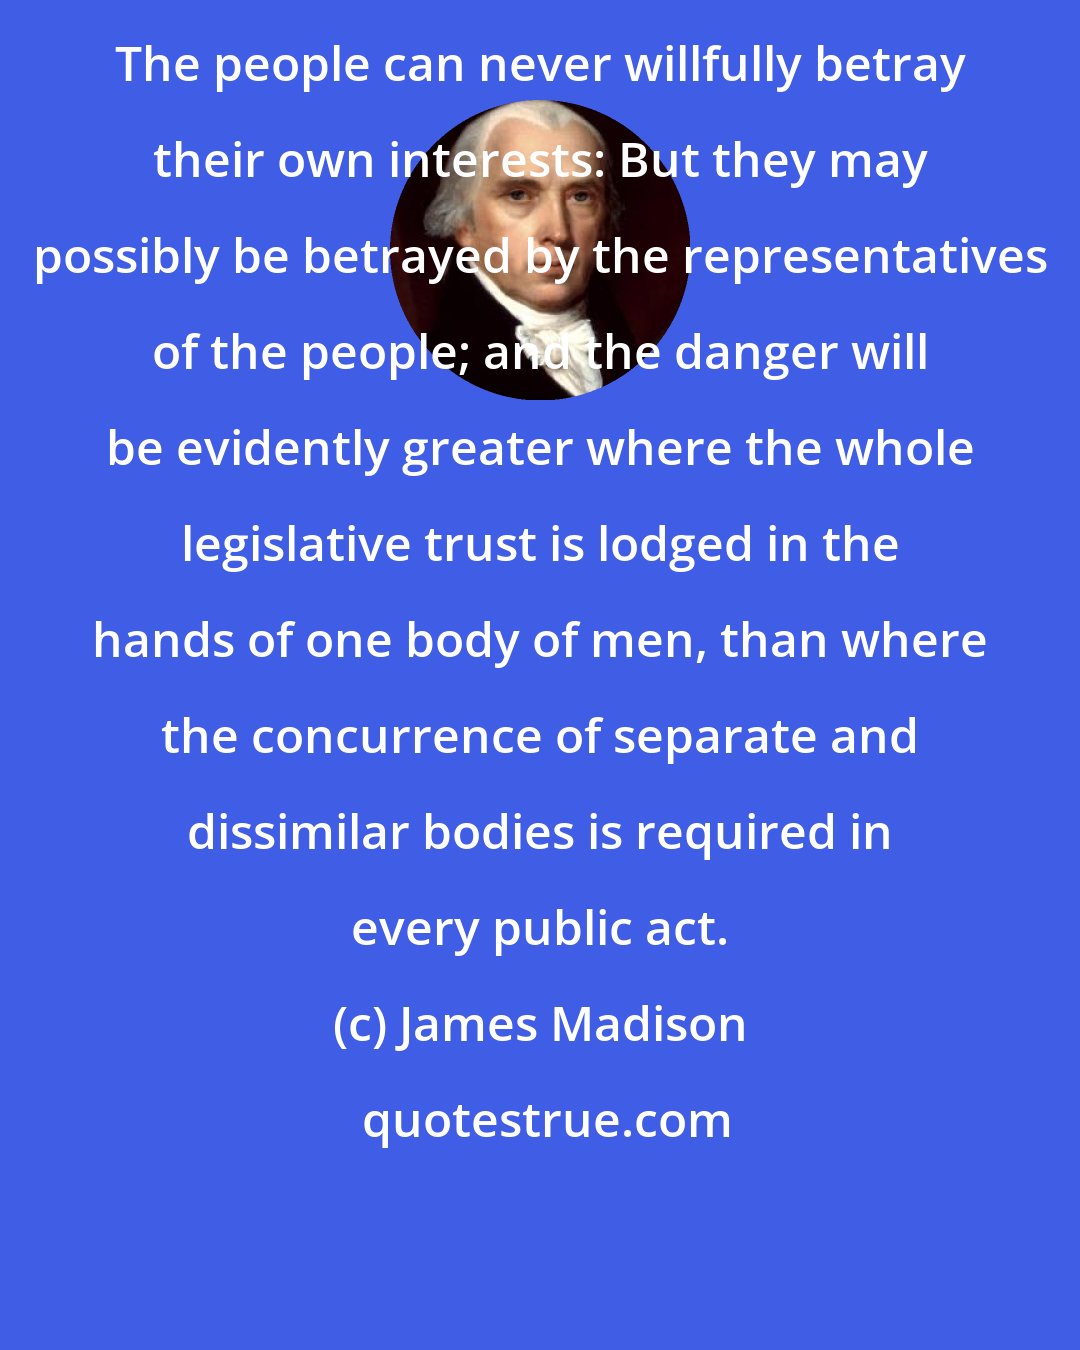 James Madison: The people can never willfully betray their own interests: But they may possibly be betrayed by the representatives of the people; and the danger will be evidently greater where the whole legislative trust is lodged in the hands of one body of men, than where the concurrence of separate and dissimilar bodies is required in every public act.